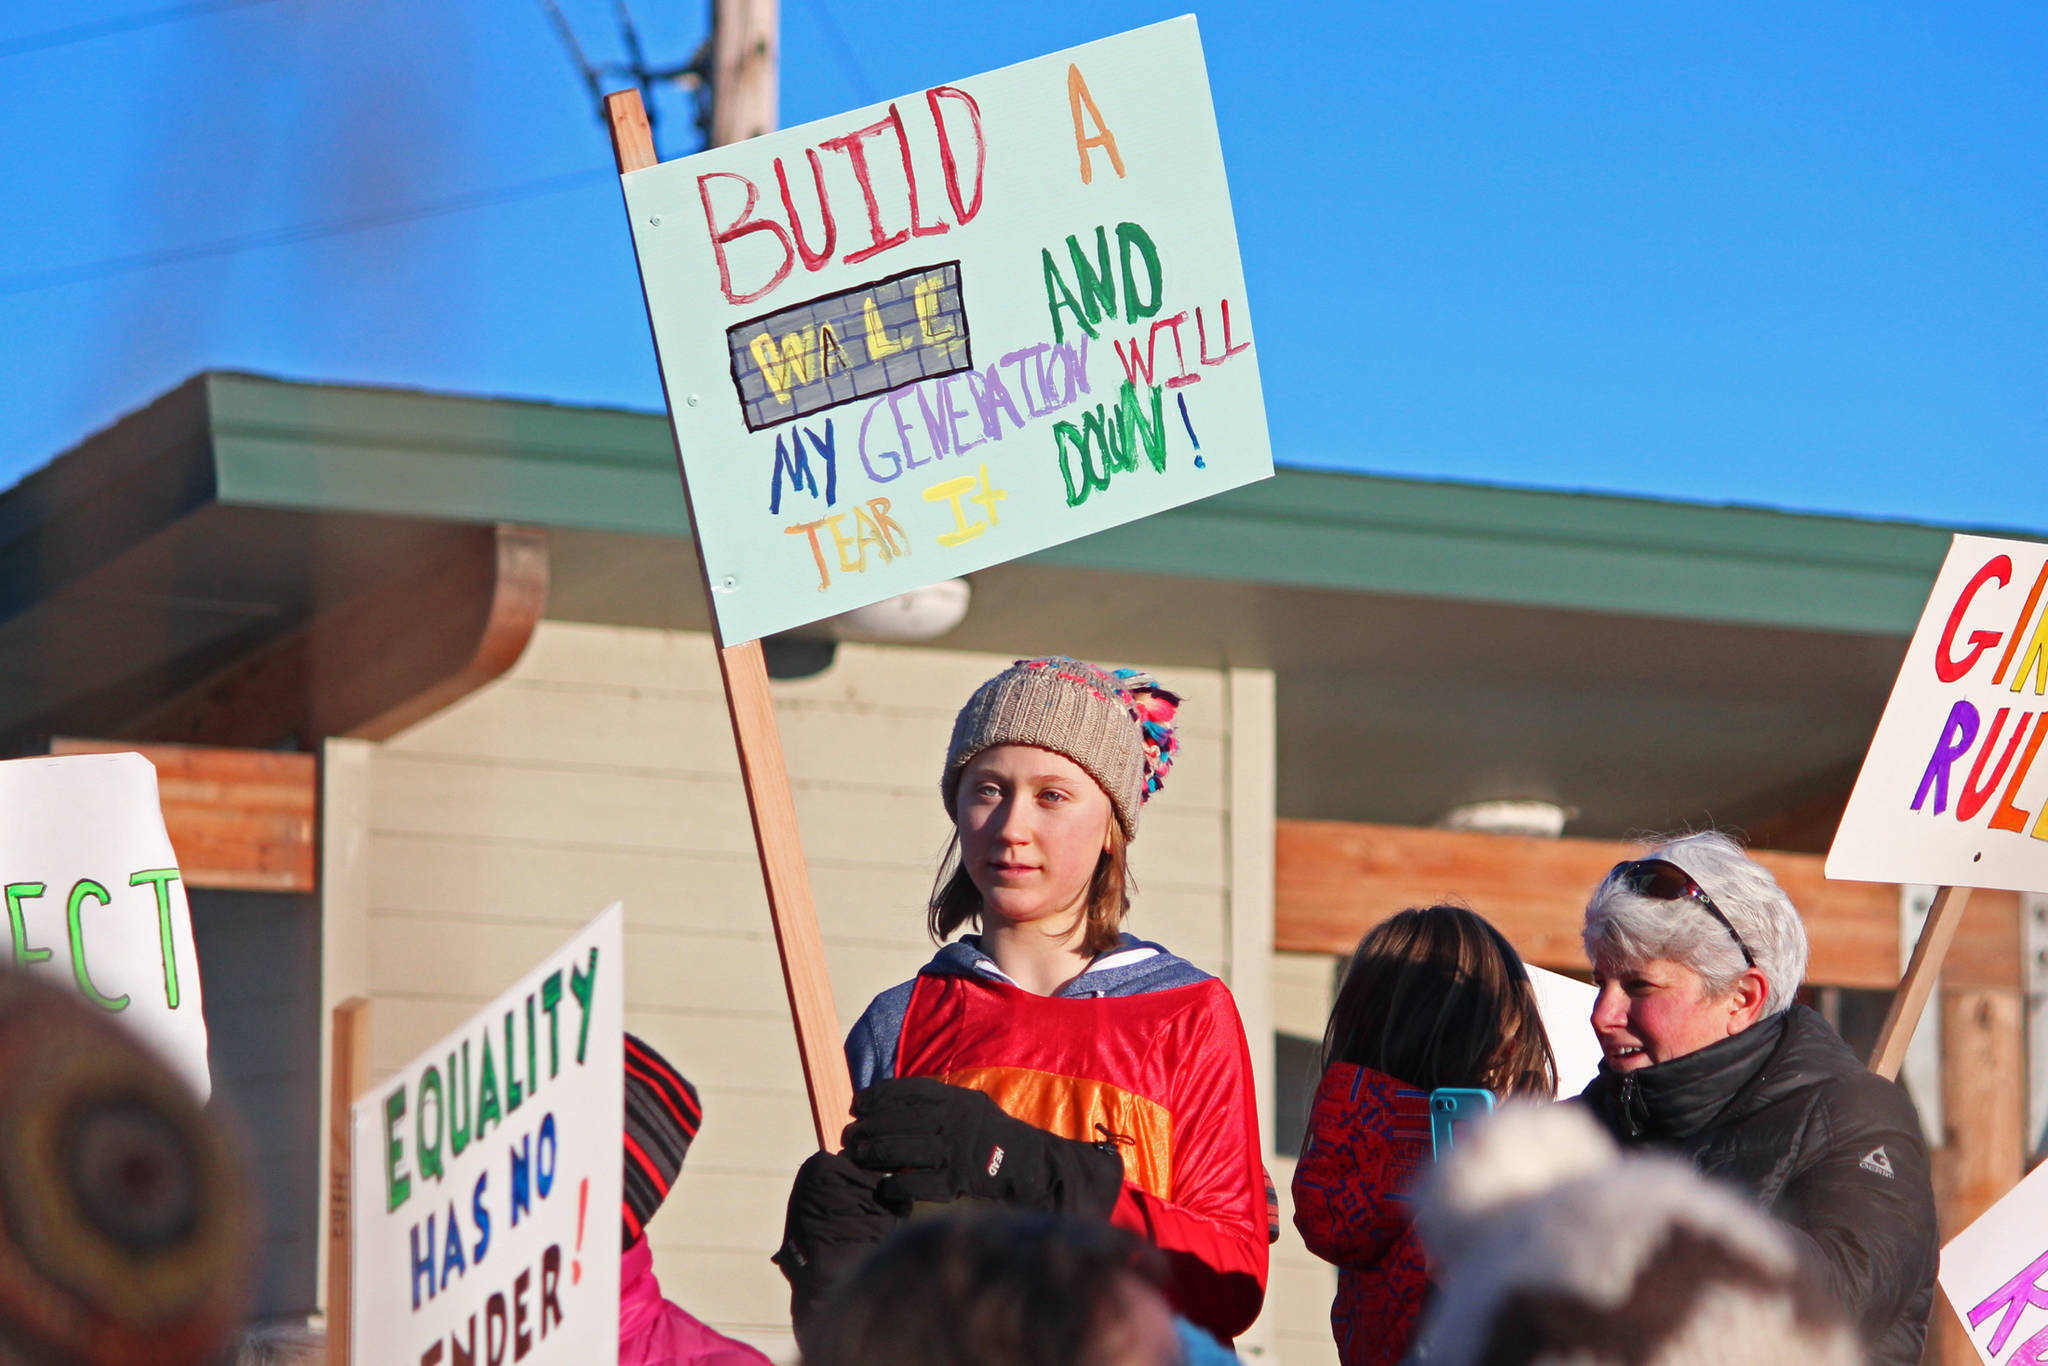 A girl holds up a sign reading, “Build a wall and my generation will tear it down,” at WKFL Park following the 2019 Women’s March on Homer on Saturday, Jan. 19, 2019 in Homer, Alaska. (Photo by Megan Pacer/Homer News)